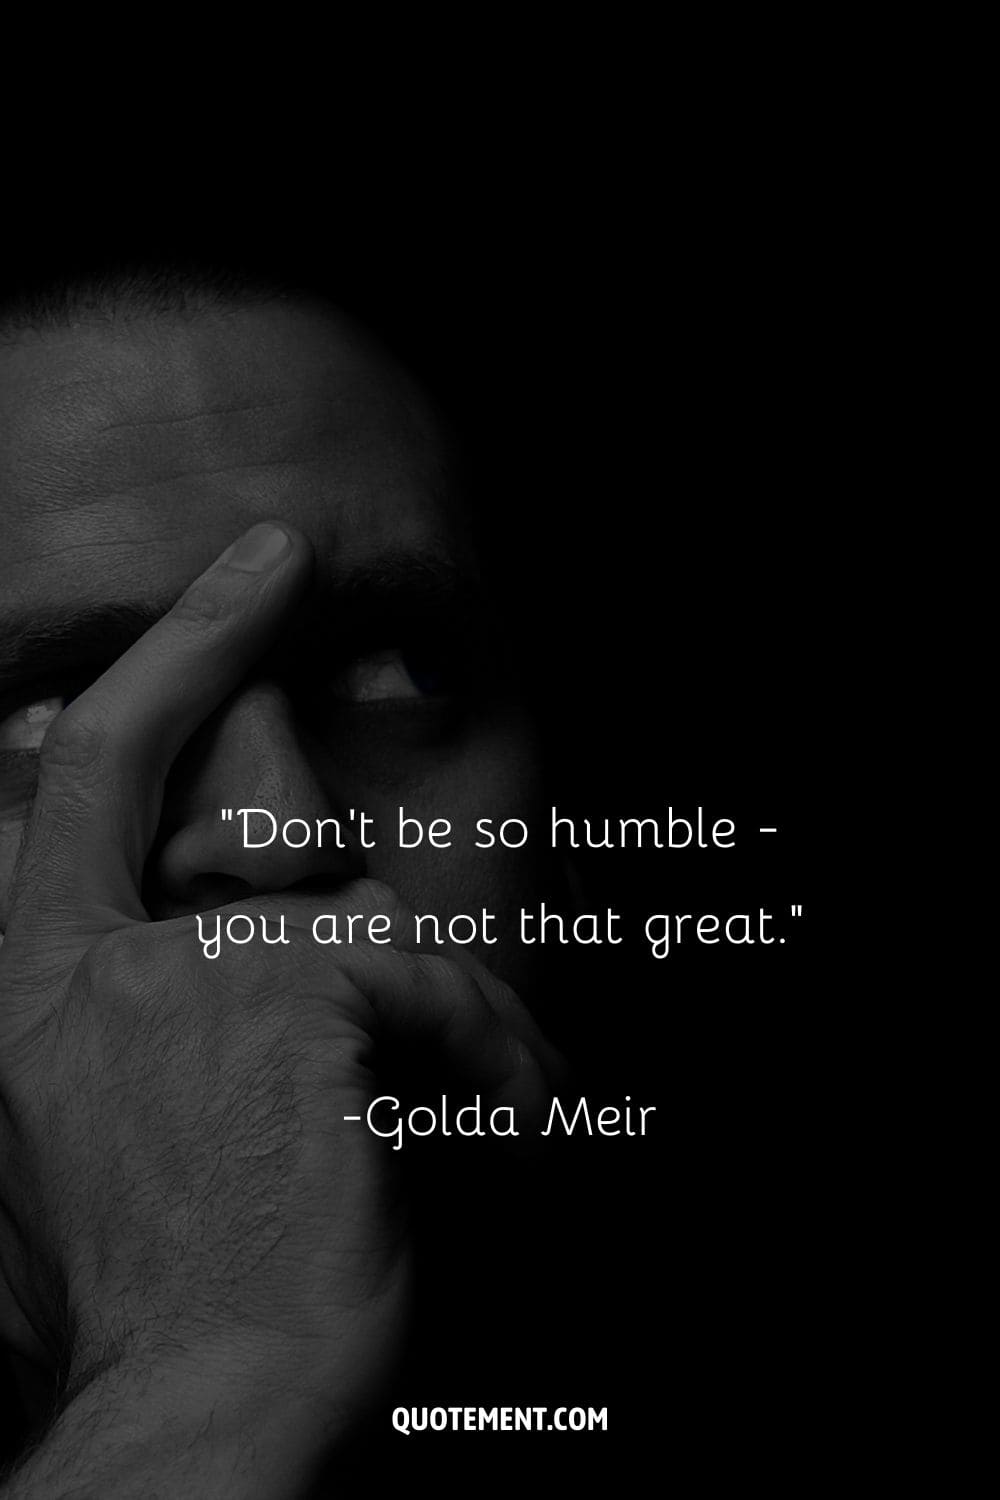 “Don't be so humble - you are not that great.” ― Golda Meir